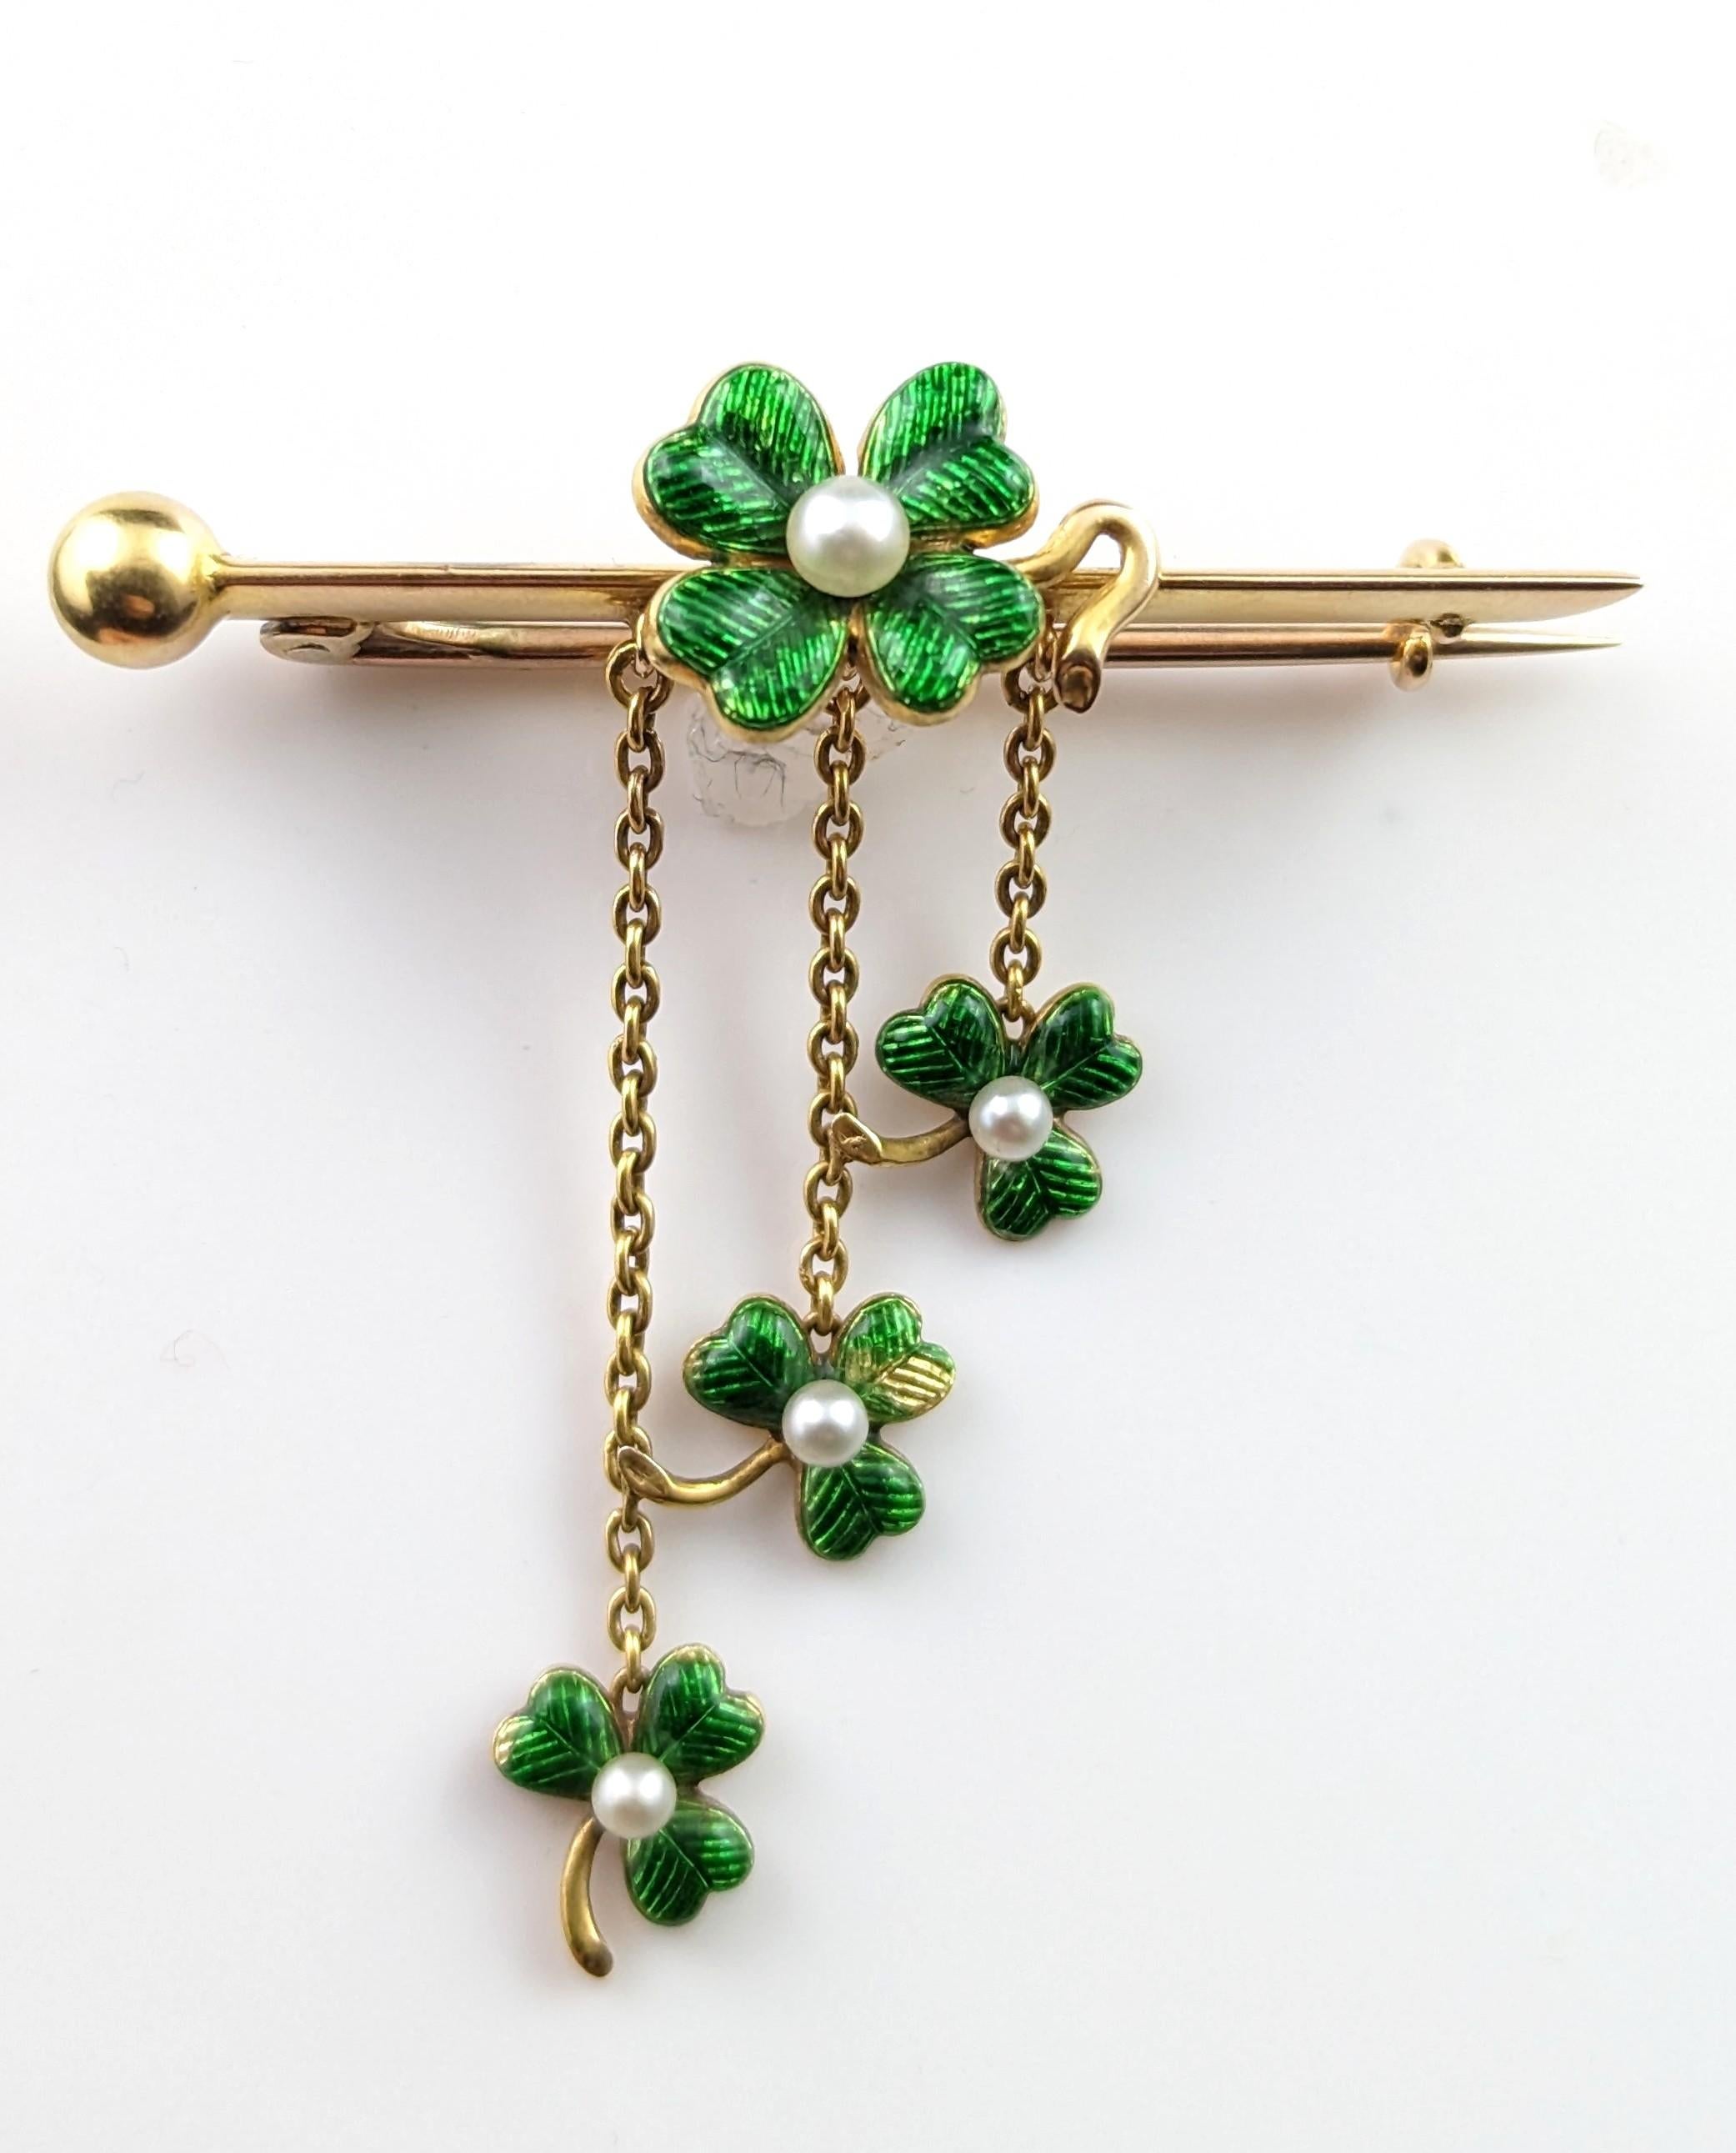 Antique Shamrock brooch, 15k gold, Guilloche enamel and seed pearl 4